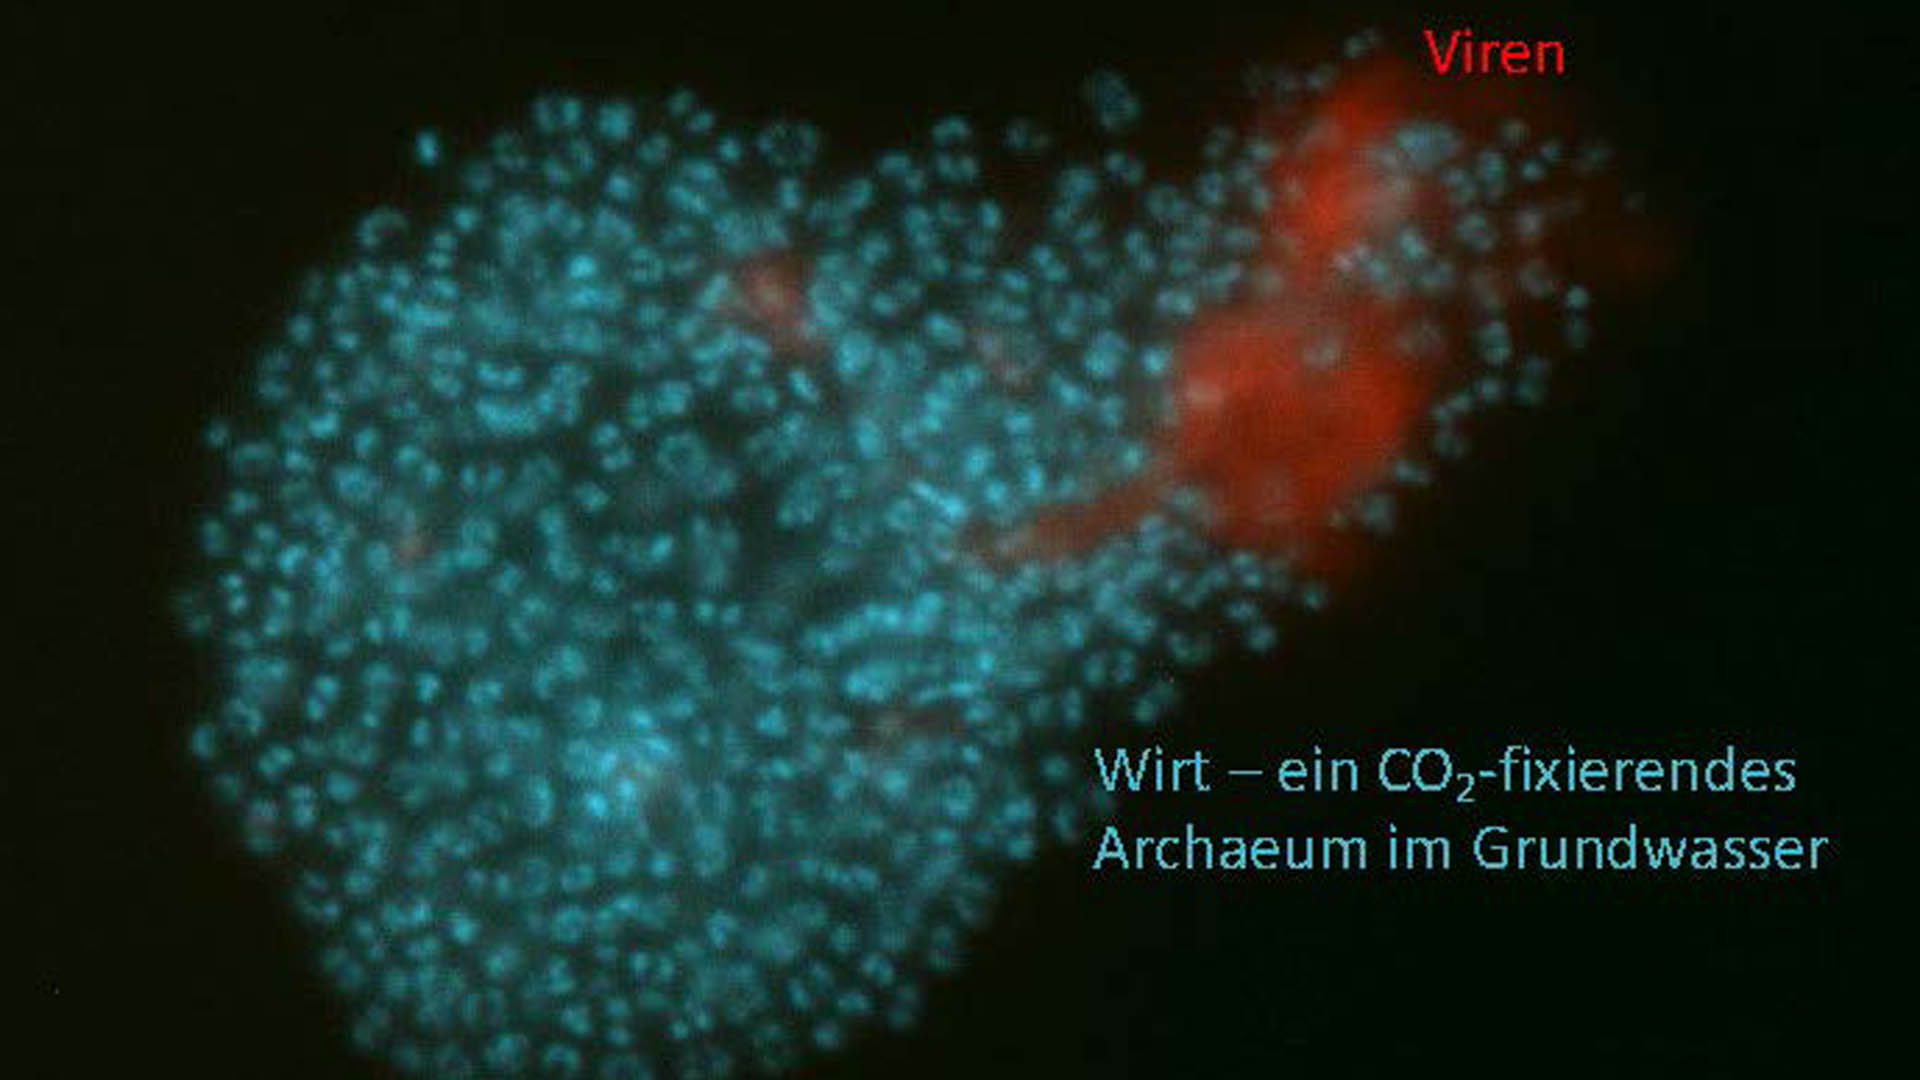 Viruses and their host, a CO2-fixing archaeum in groundwater